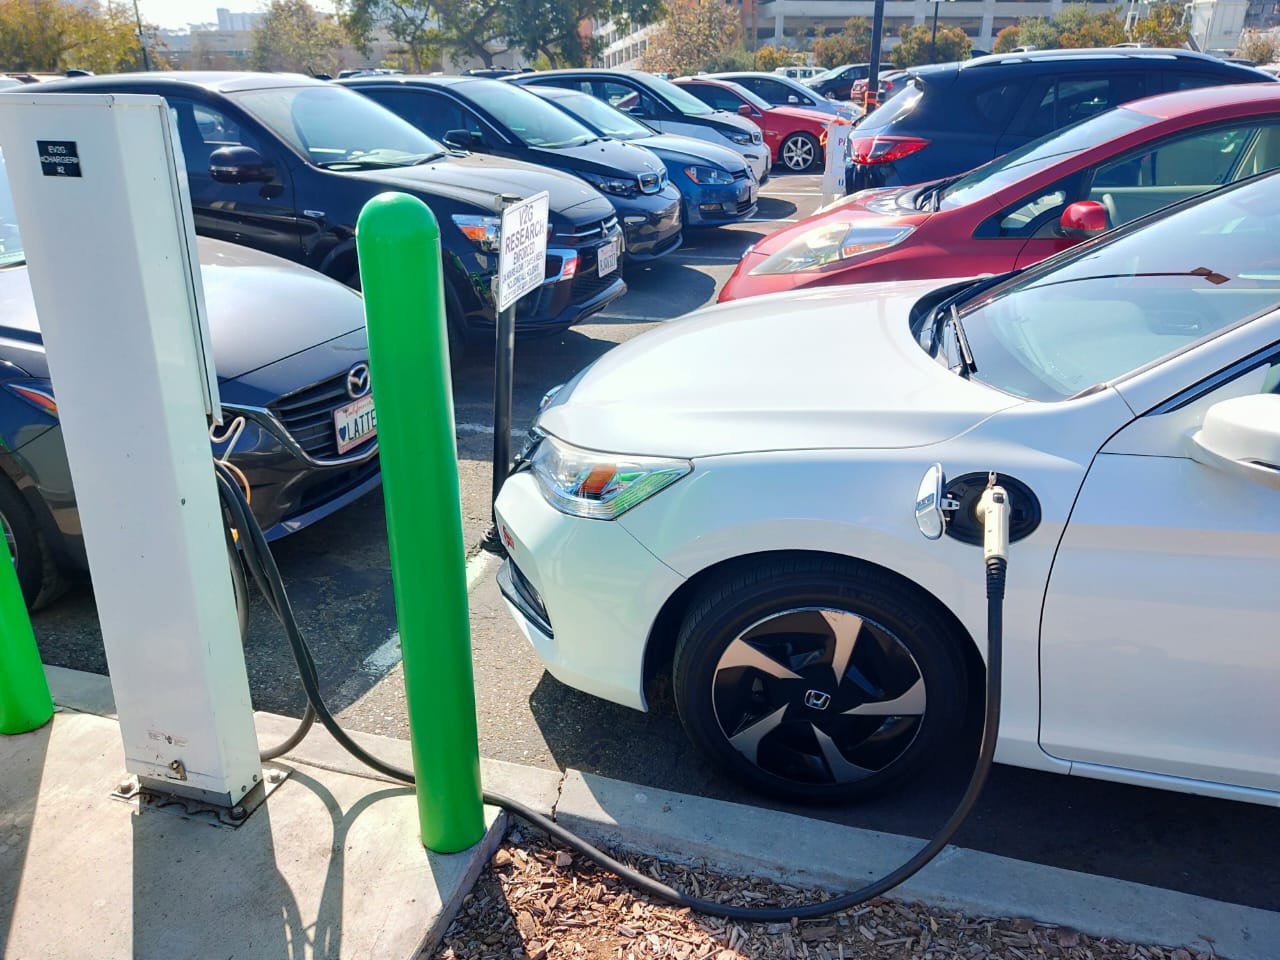 All 50 states in the US to get EV charging stations covering 75,000 miles of highway